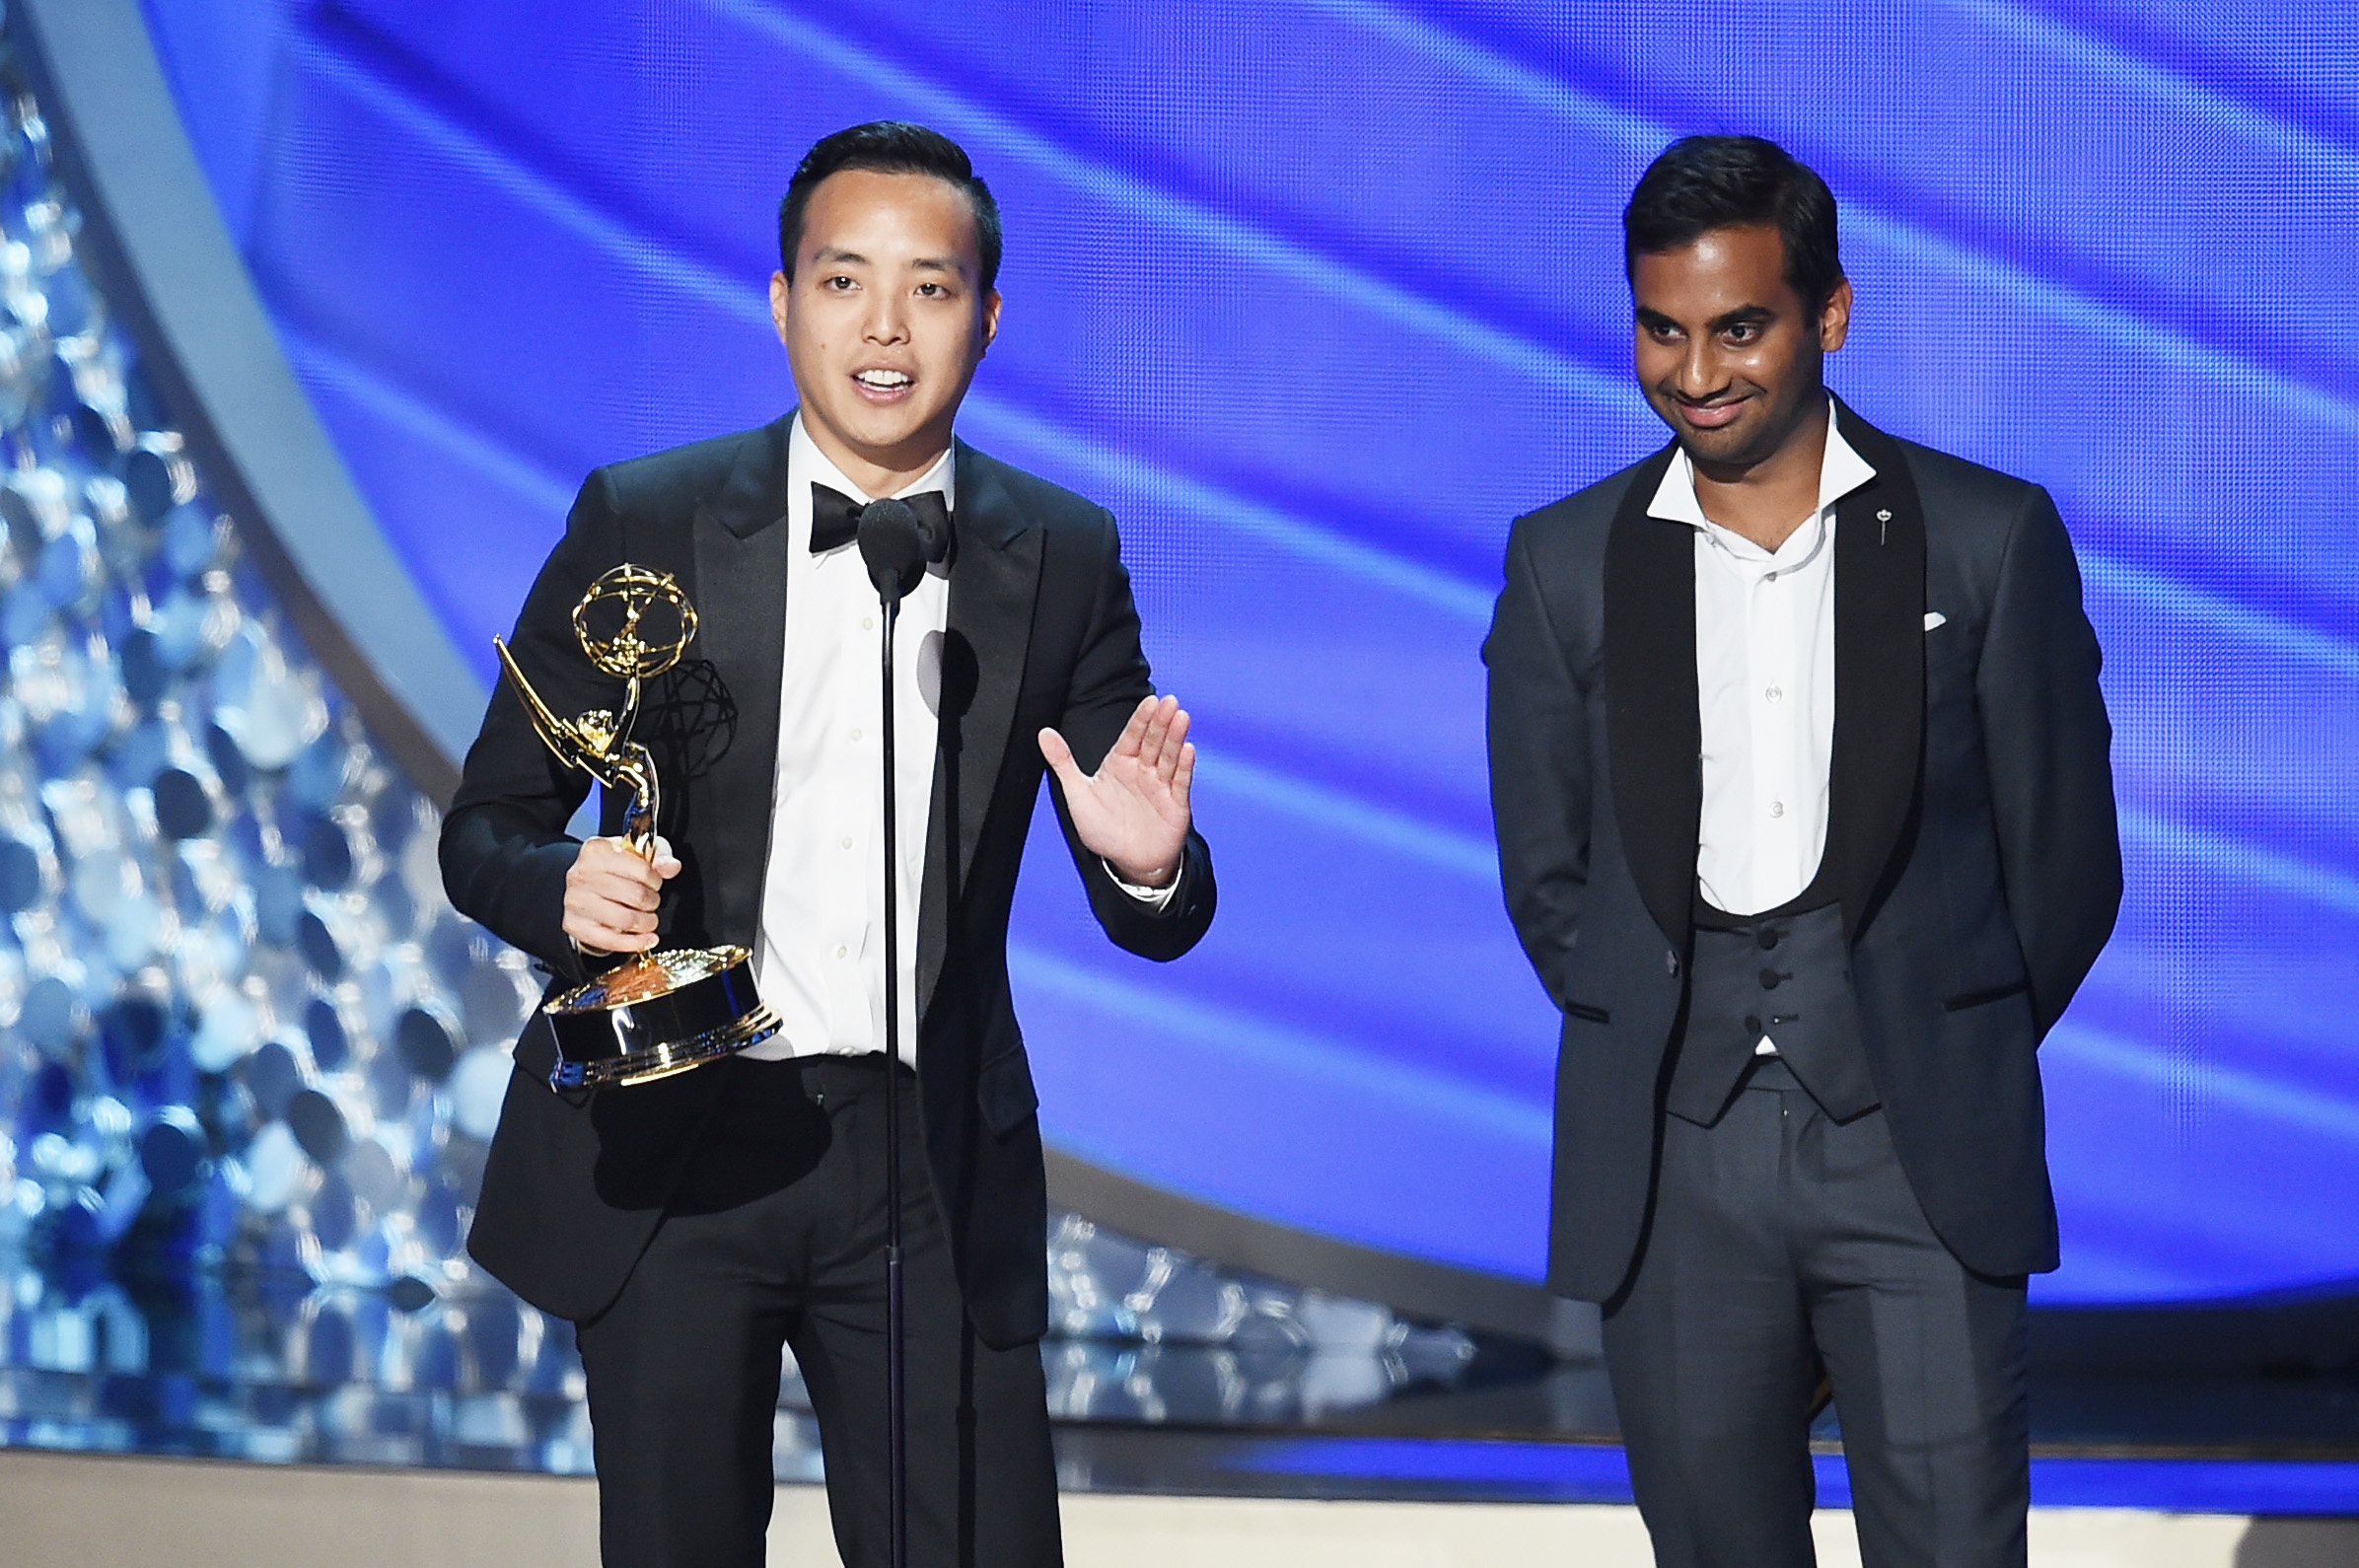 Alan Yang and Aziz Ansari accept Outstanding Writing for a Comedy Series for the Master of None episode "Parents" during the 68th Annual Primetime Emmy Awards on Sept. 18, 2016 in Los Angeles.